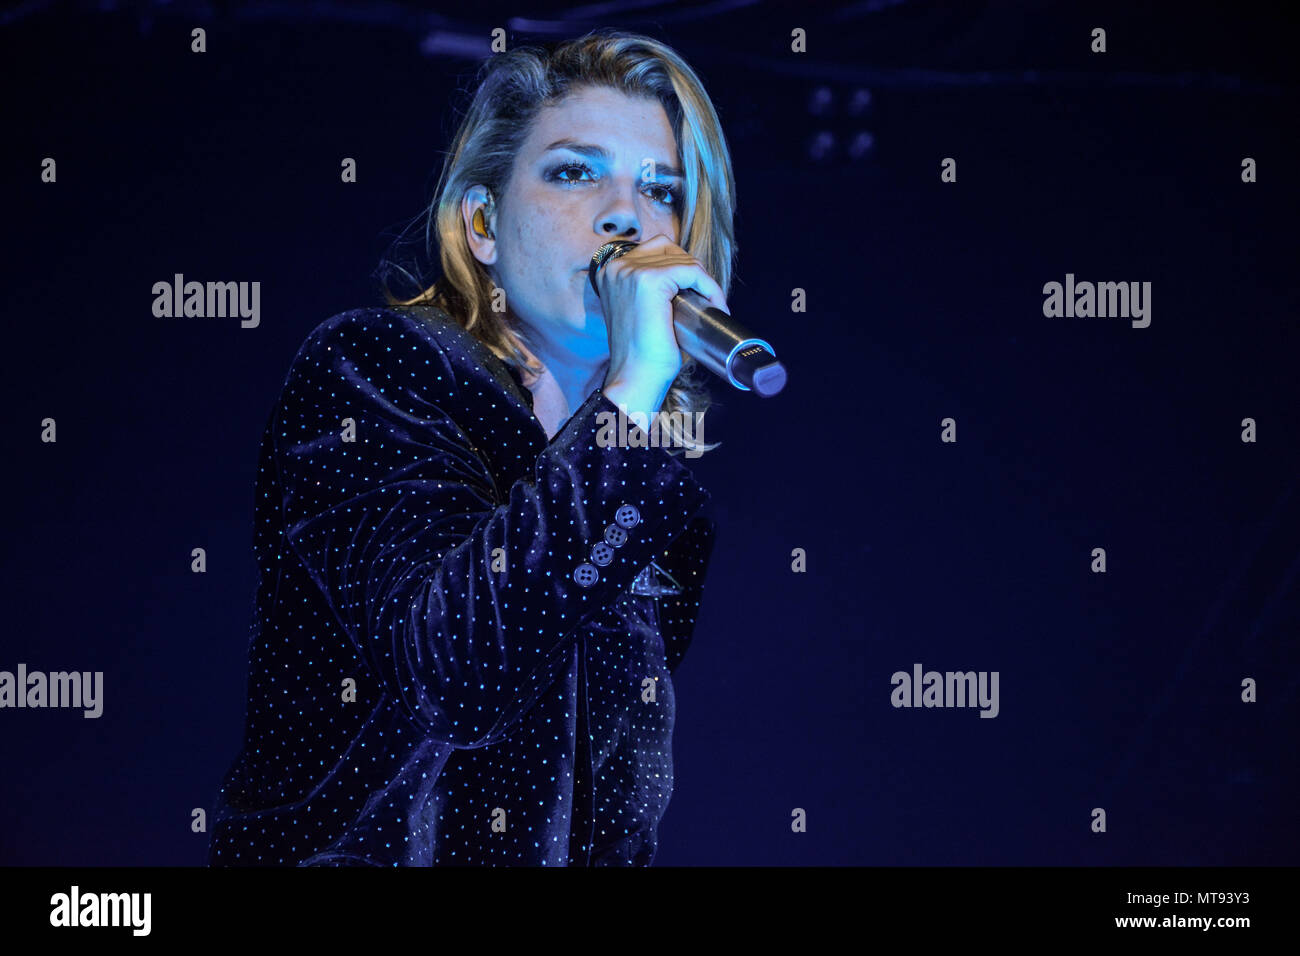 Naples, Italy. 28 May, 2018. The italian singer Emmanuela Marrone, also known as Emma or Emma Marrone performing live for the last date of her tour 'Essere Qui Tour 2018' at the Teatro Palapartenope in Naples,Italy. Stock Photo